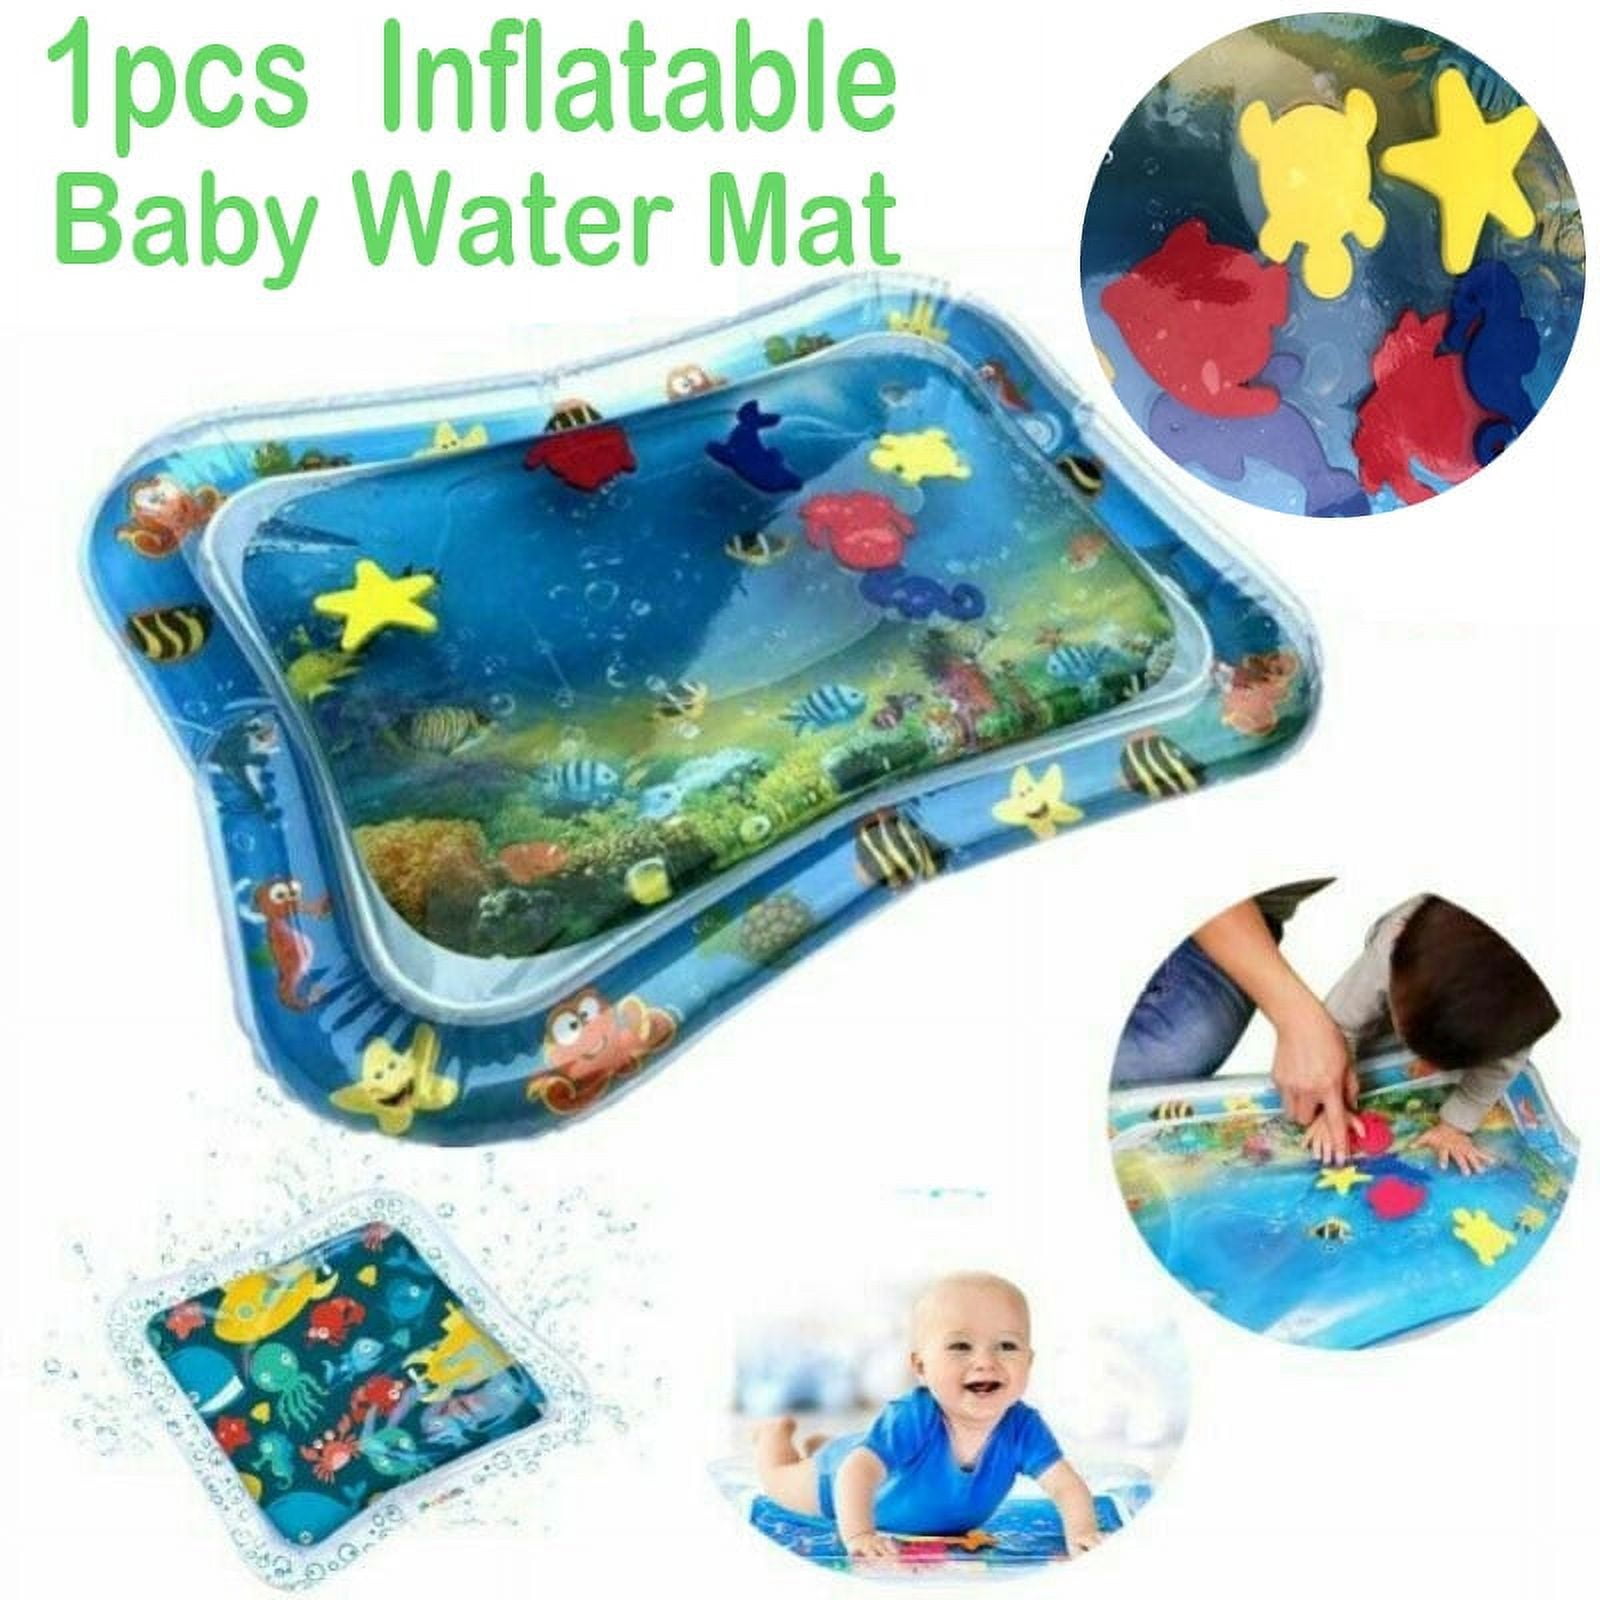 Baby Inflatable Aquarium Water Mat Toy - Milky Spoon